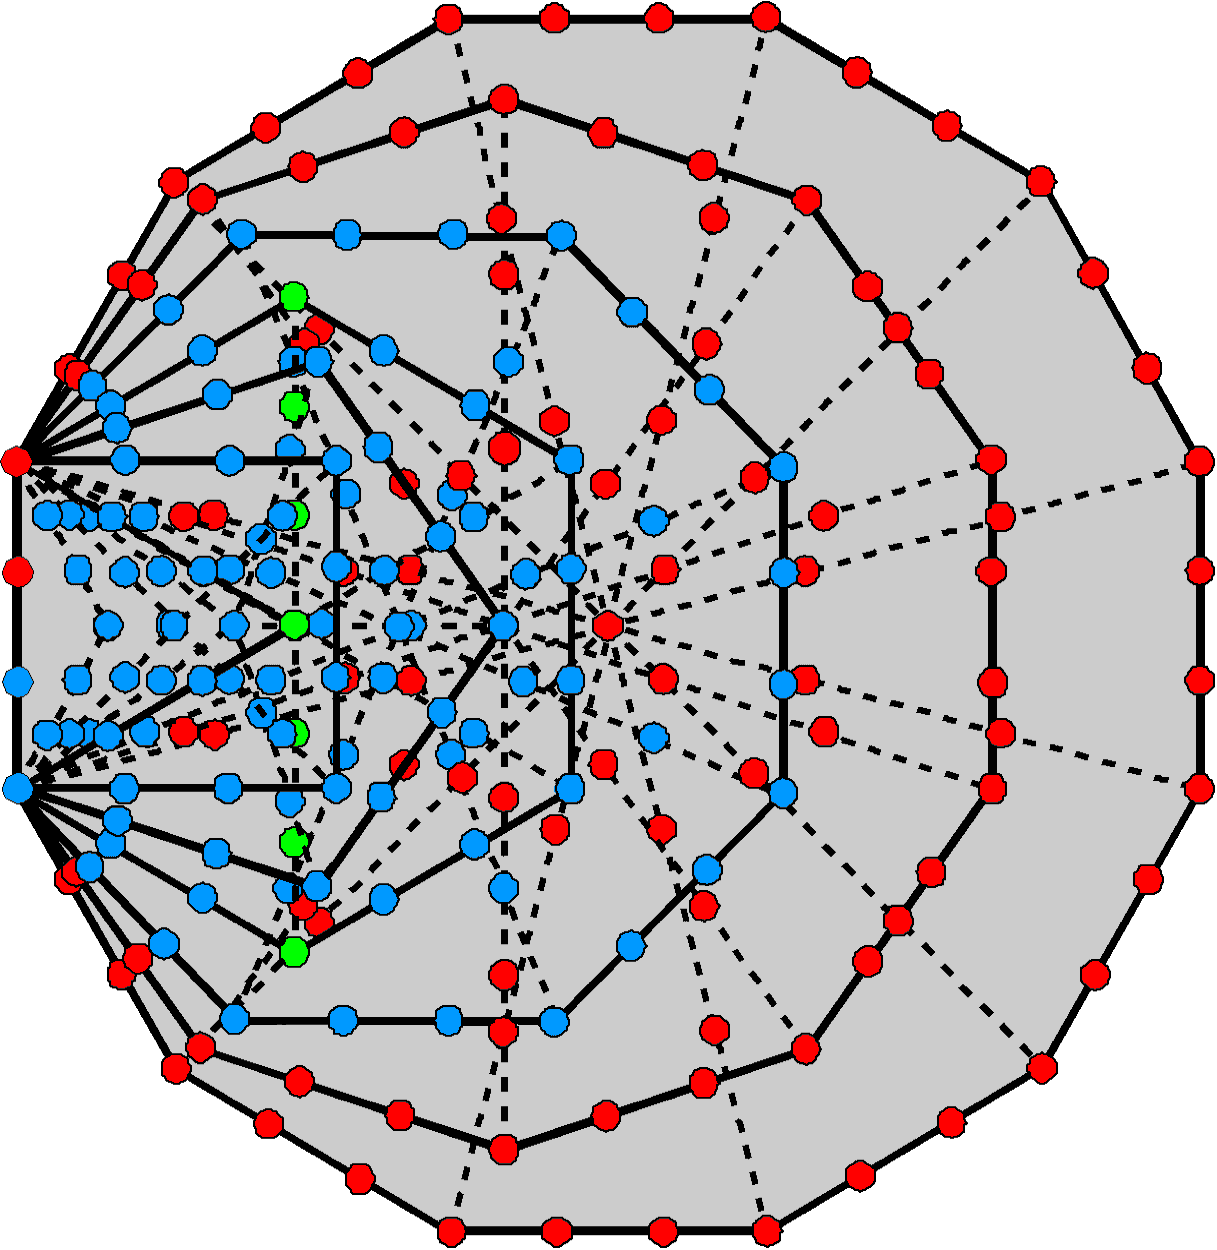 (7+105+105) boundary yods in 7 enfolded polygons